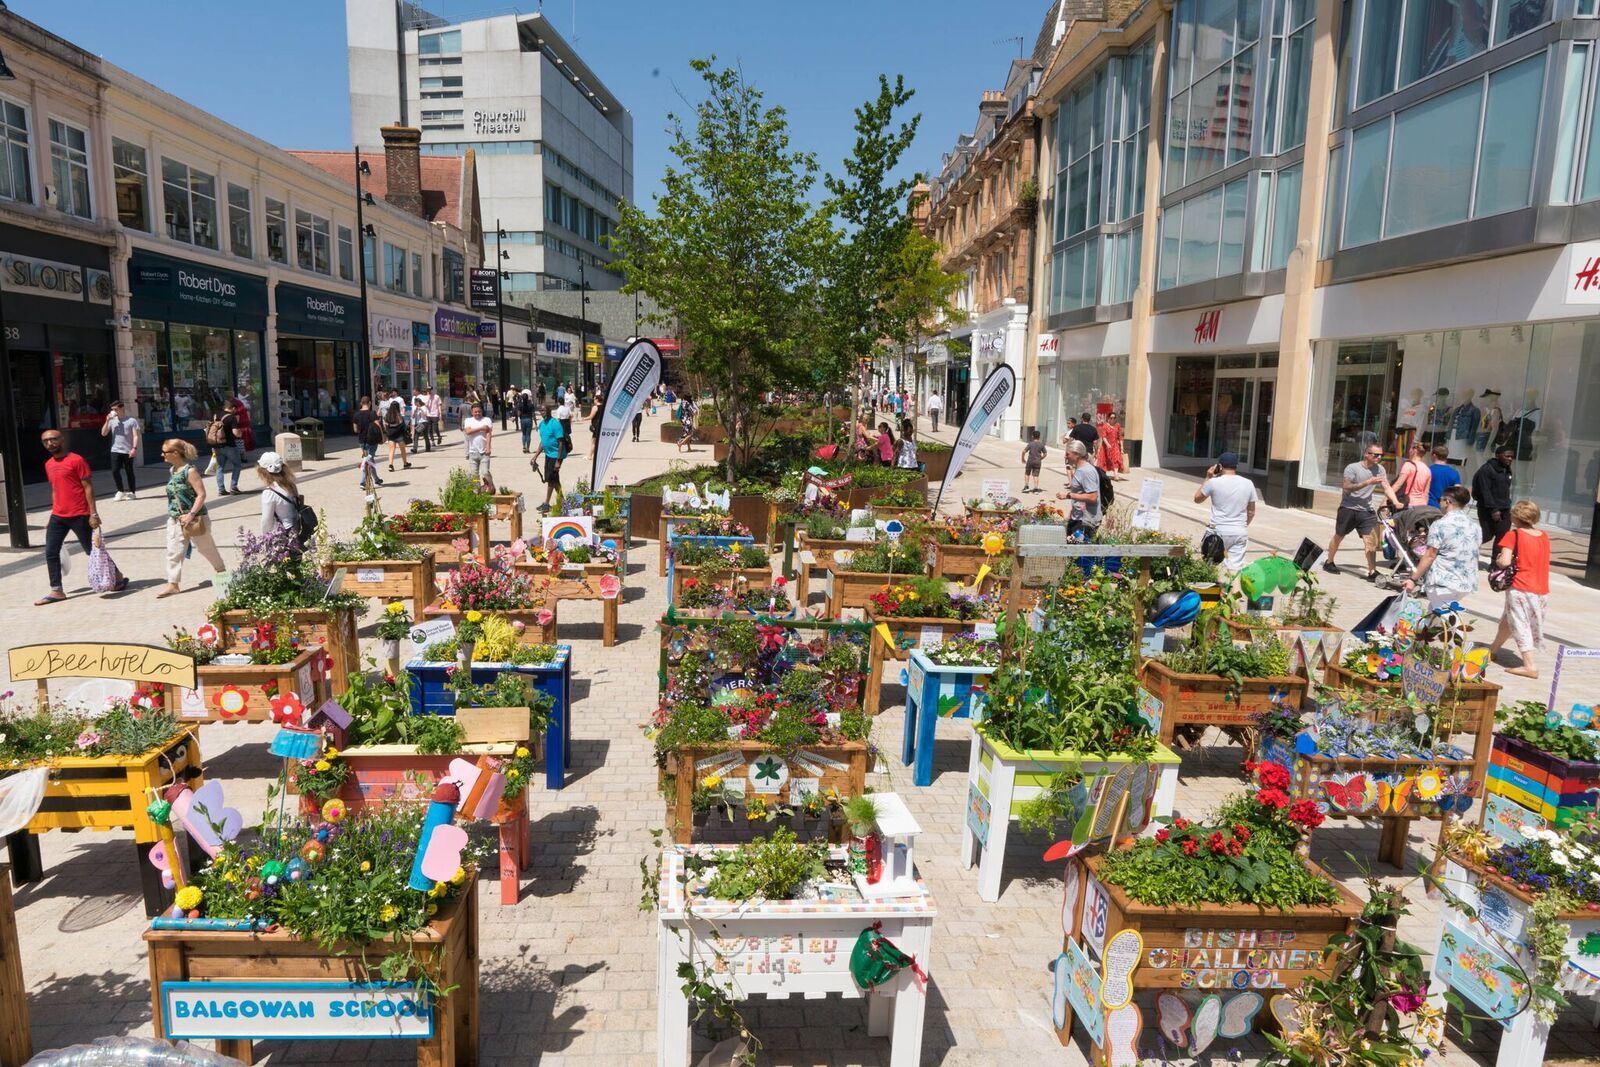 PHOTOS: Bromley High Streets turns into a sea of planters